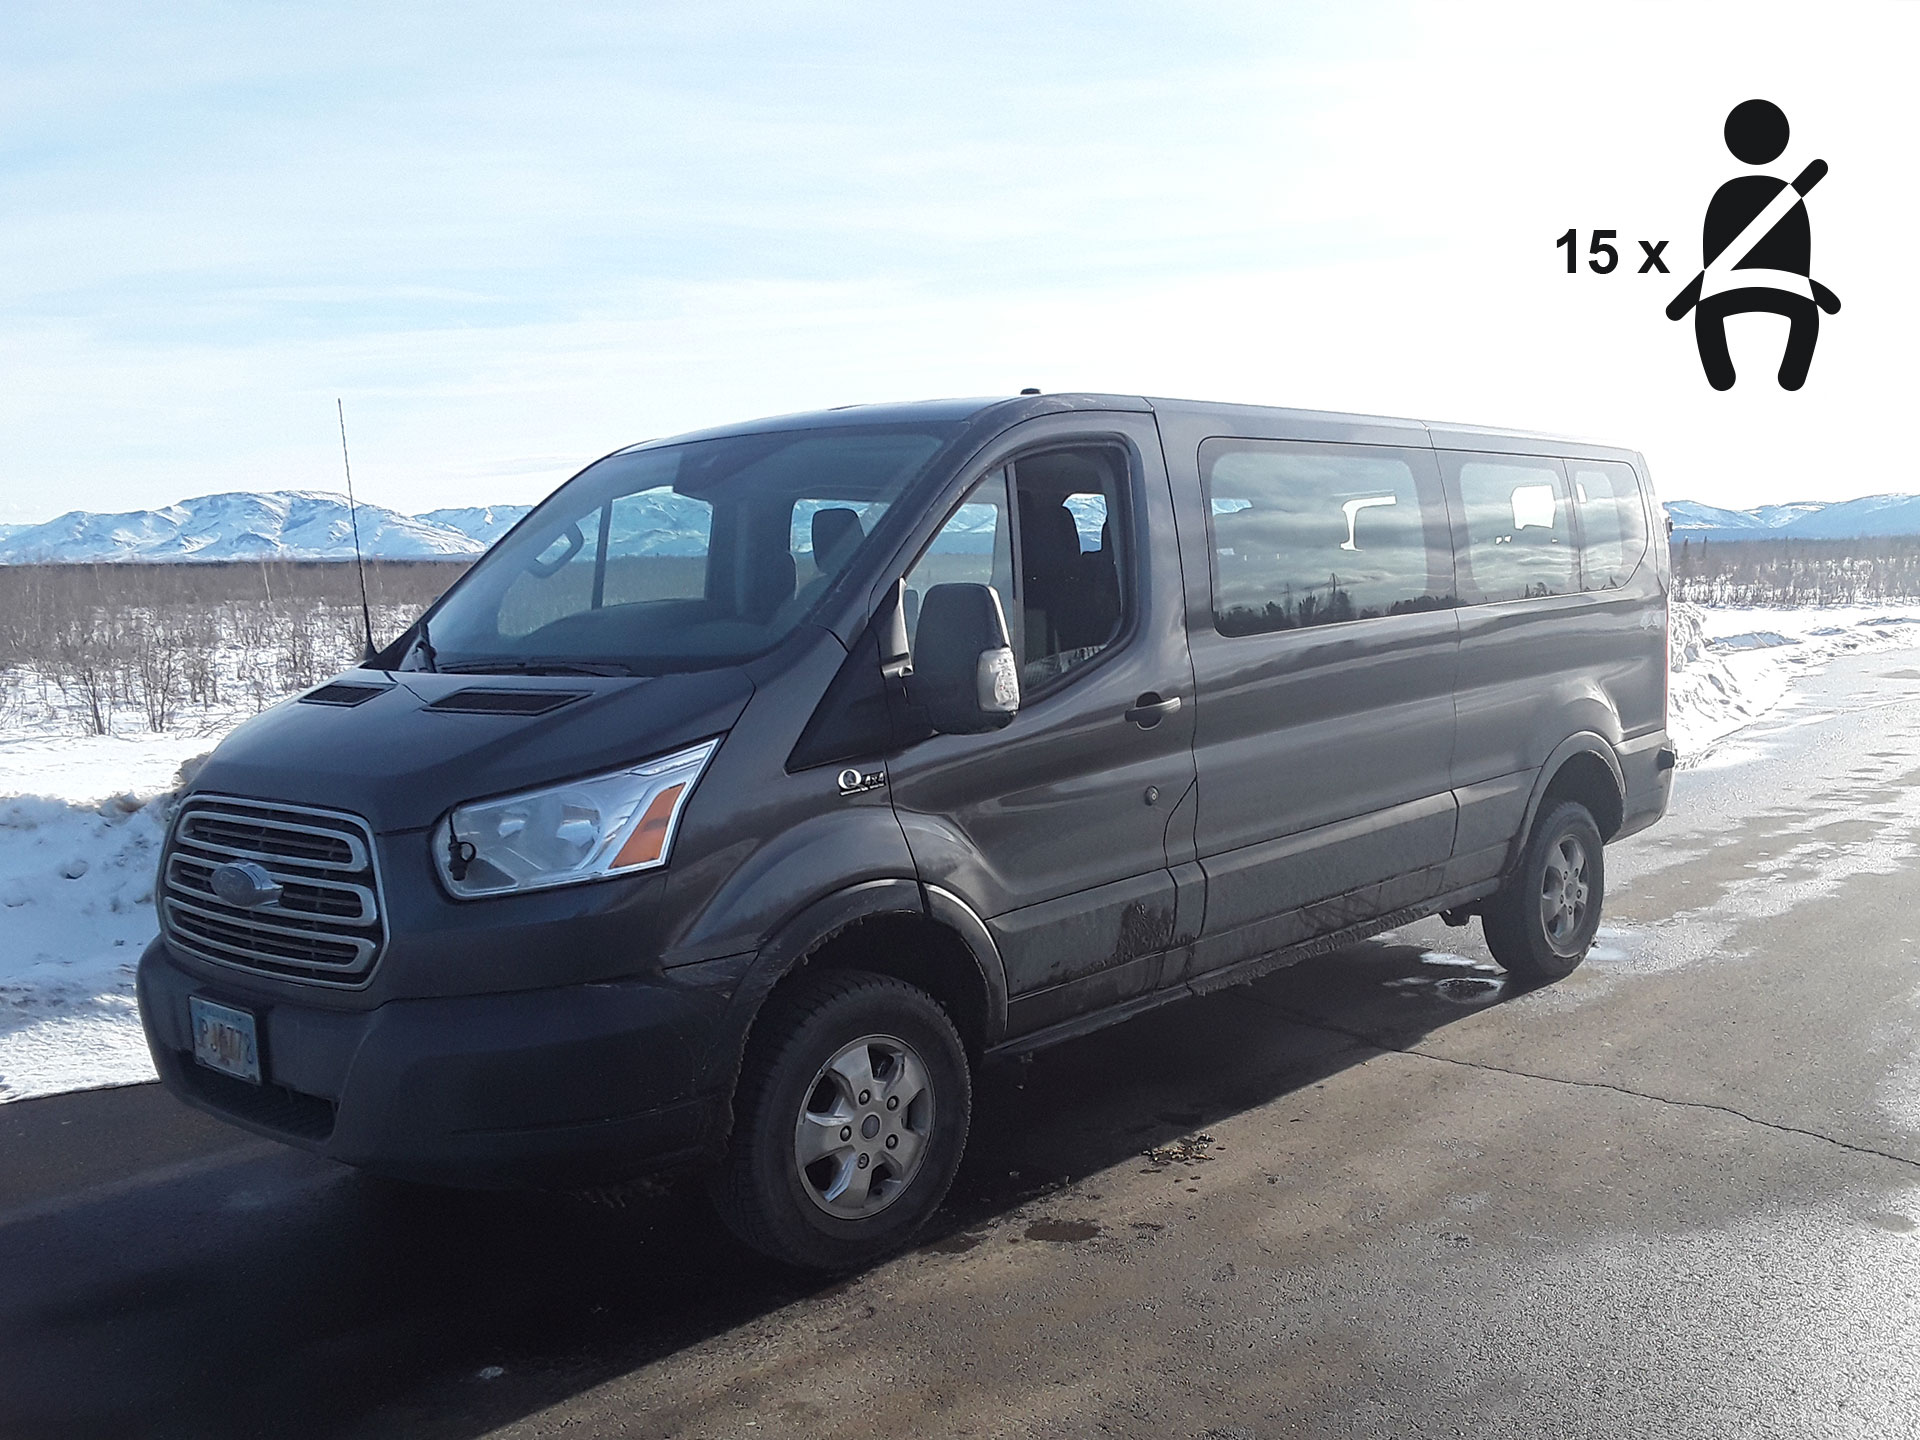 used 15 passenger van for sale in maryland